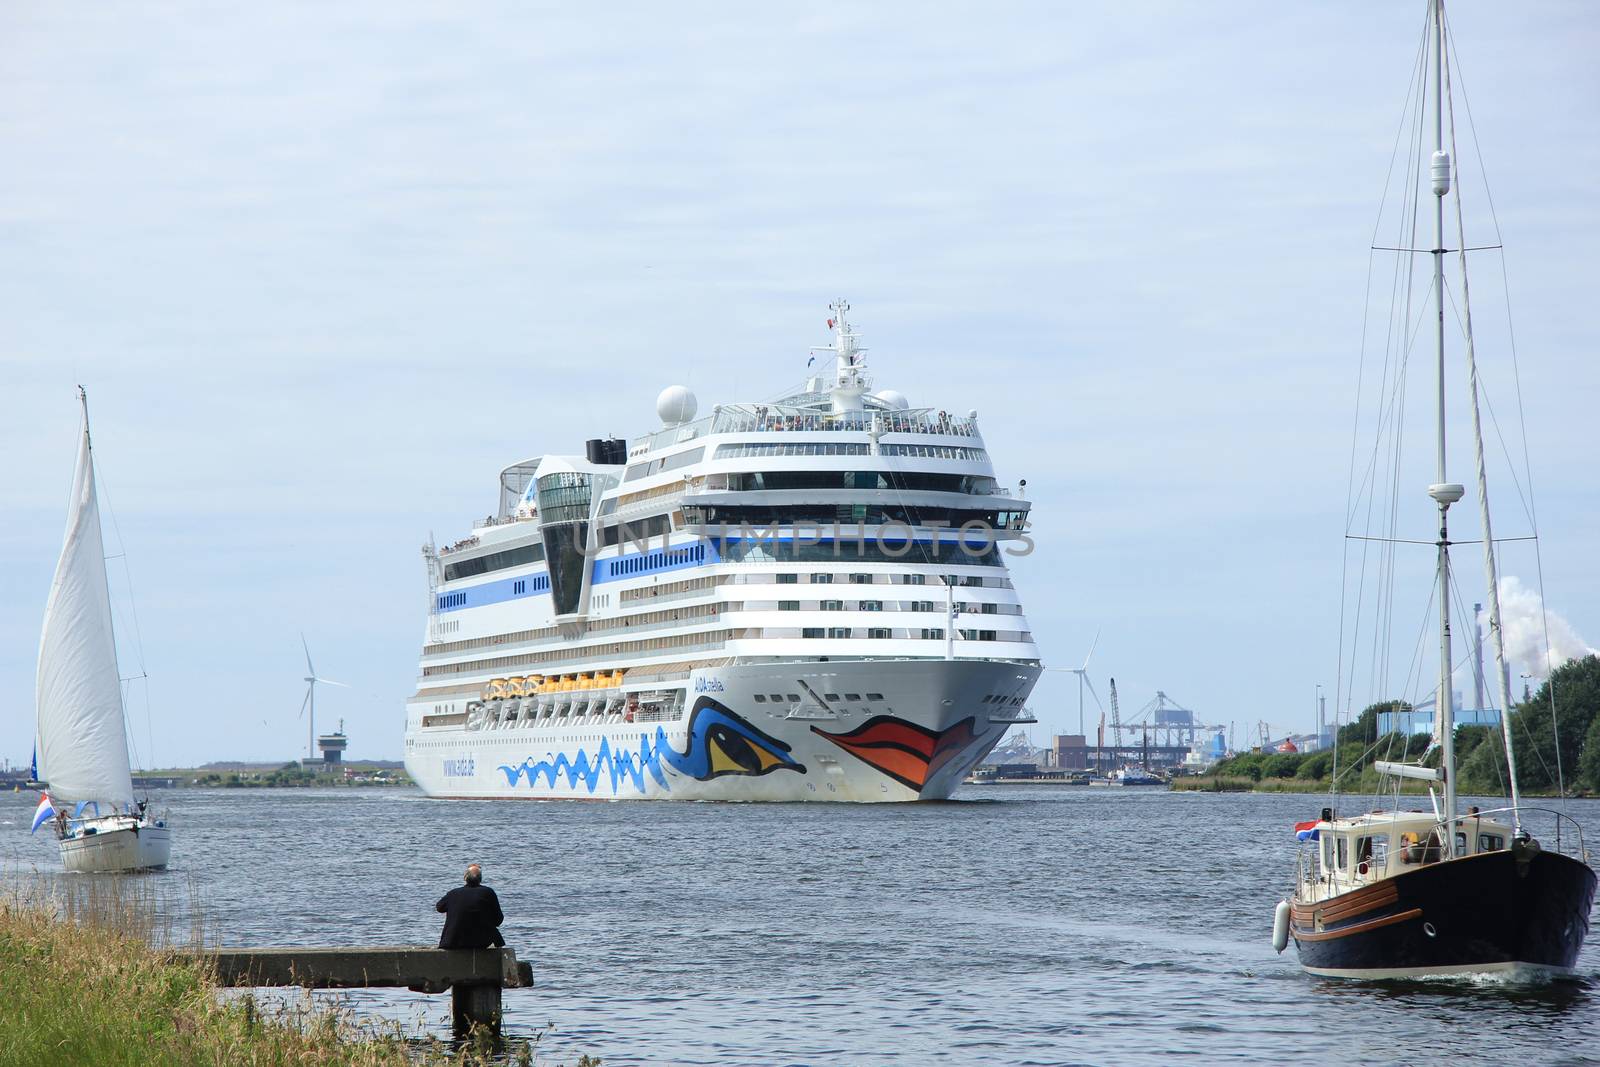 Velsen; the Netherlands, June 22nd, 2014 :Aida Stella on North Sea Canal, on it's way to the Amsterdam Cruise Terminal